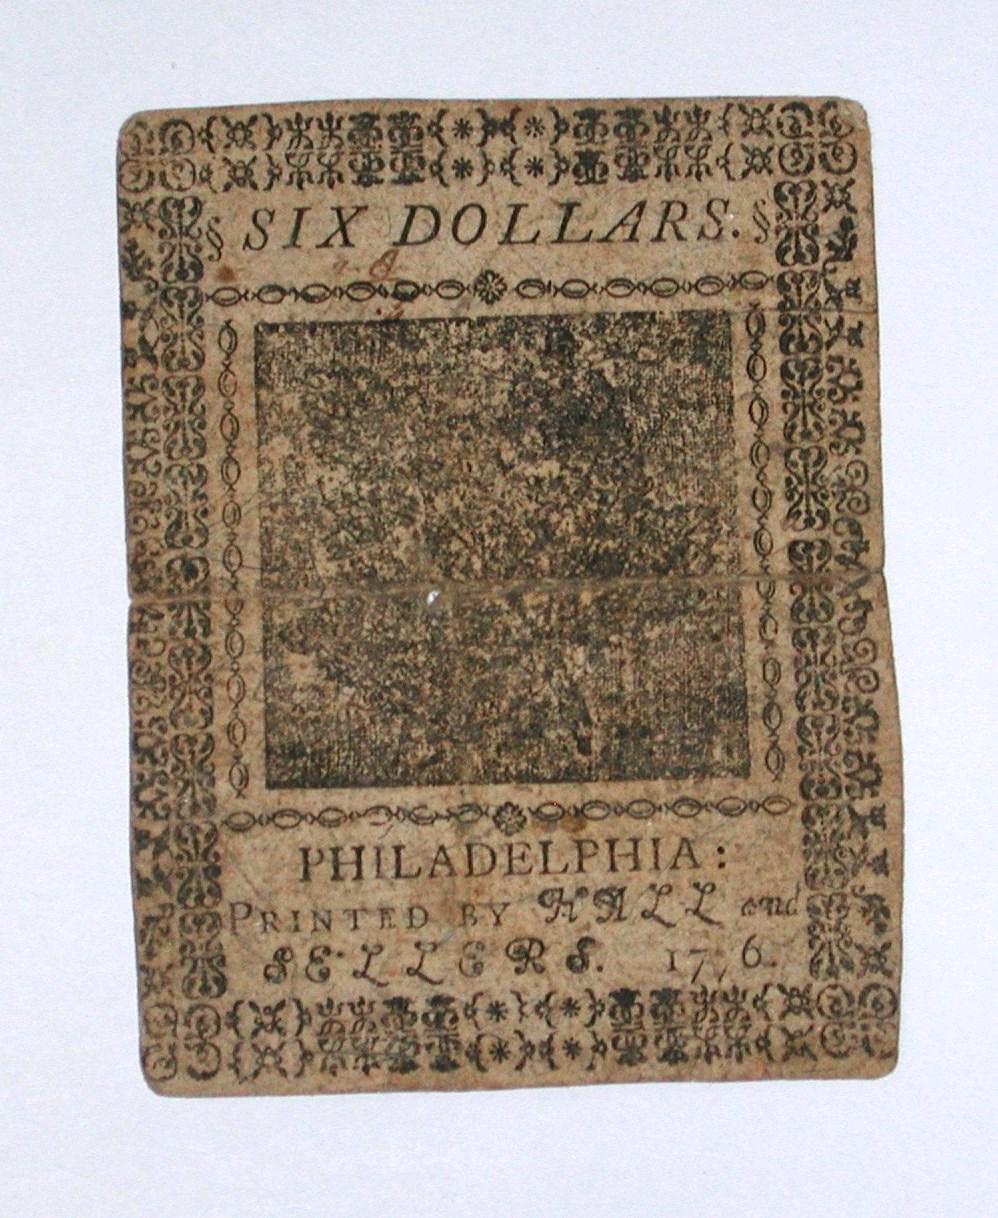 1776 CONTINENTAL CURRENCY - SIX DOLLARS